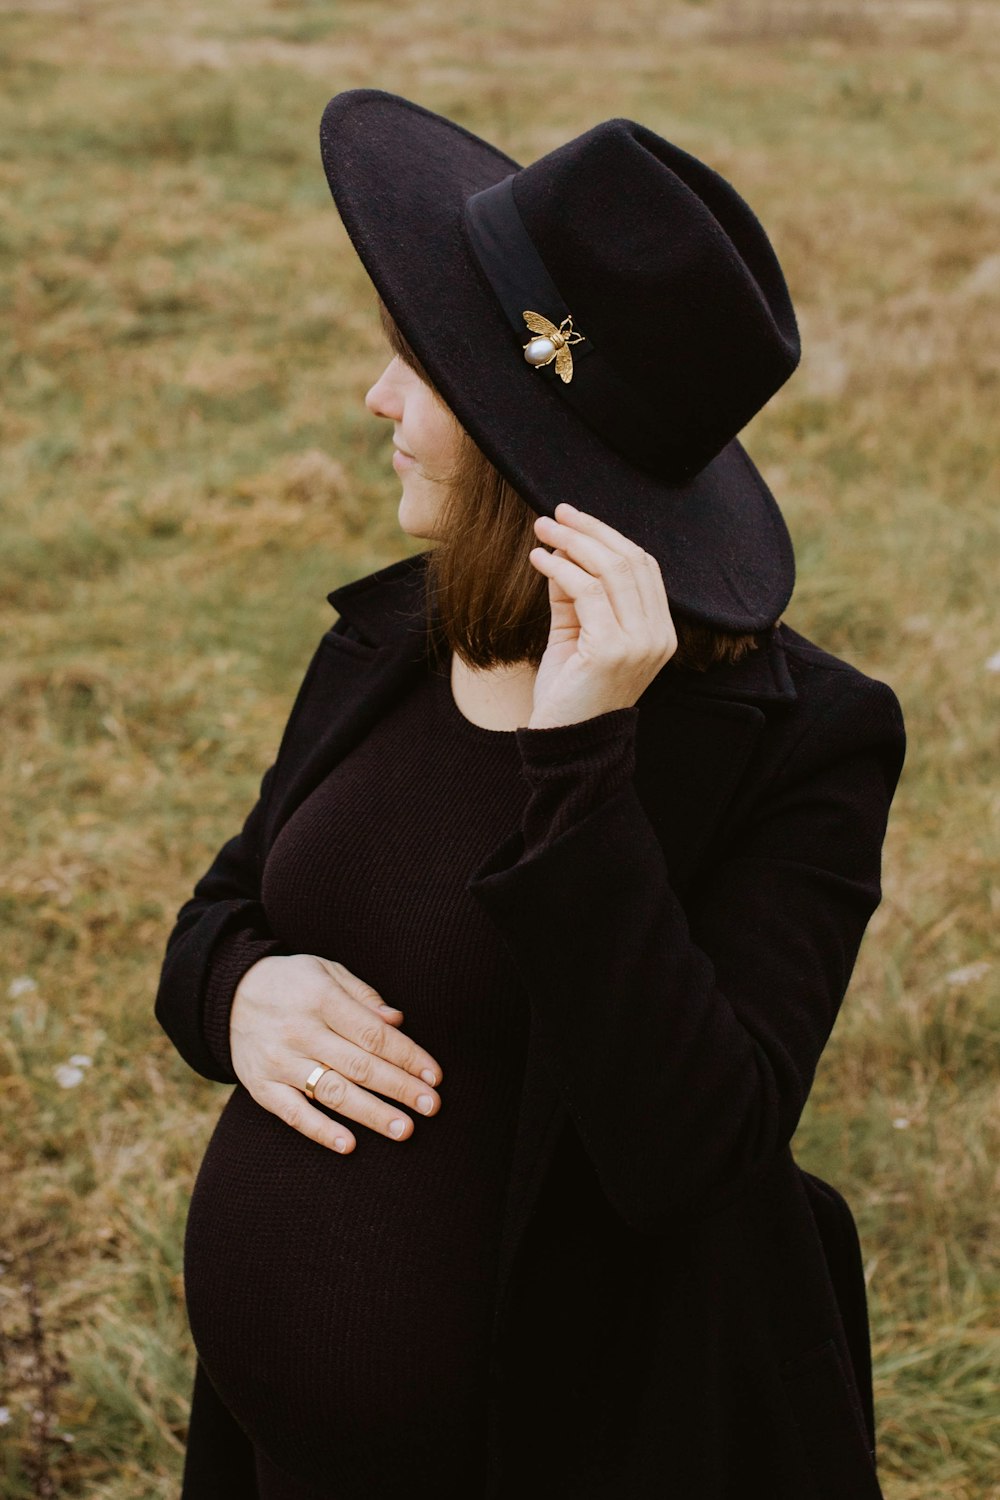 a pregnant woman wearing a black hat in a field